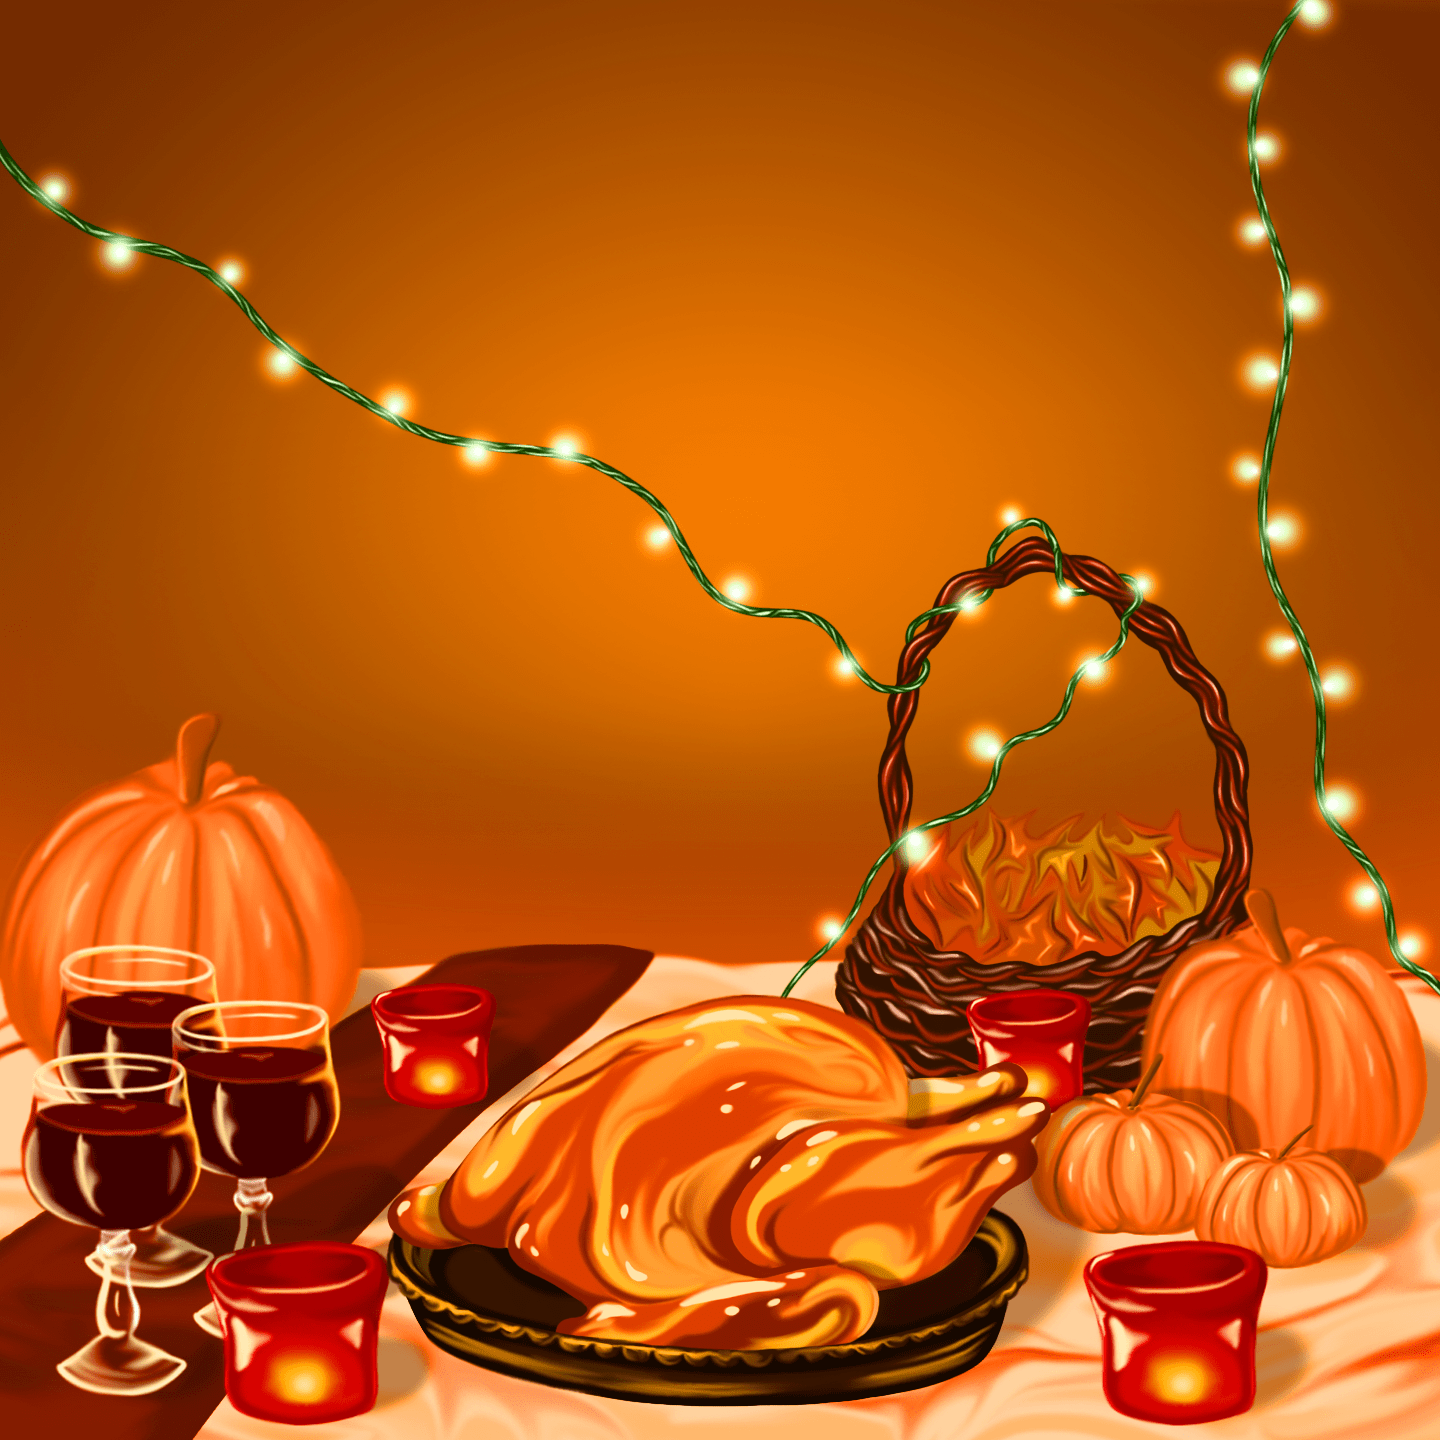 thanksgiving illustration by Reb Czukoski for use by 360 Magazine